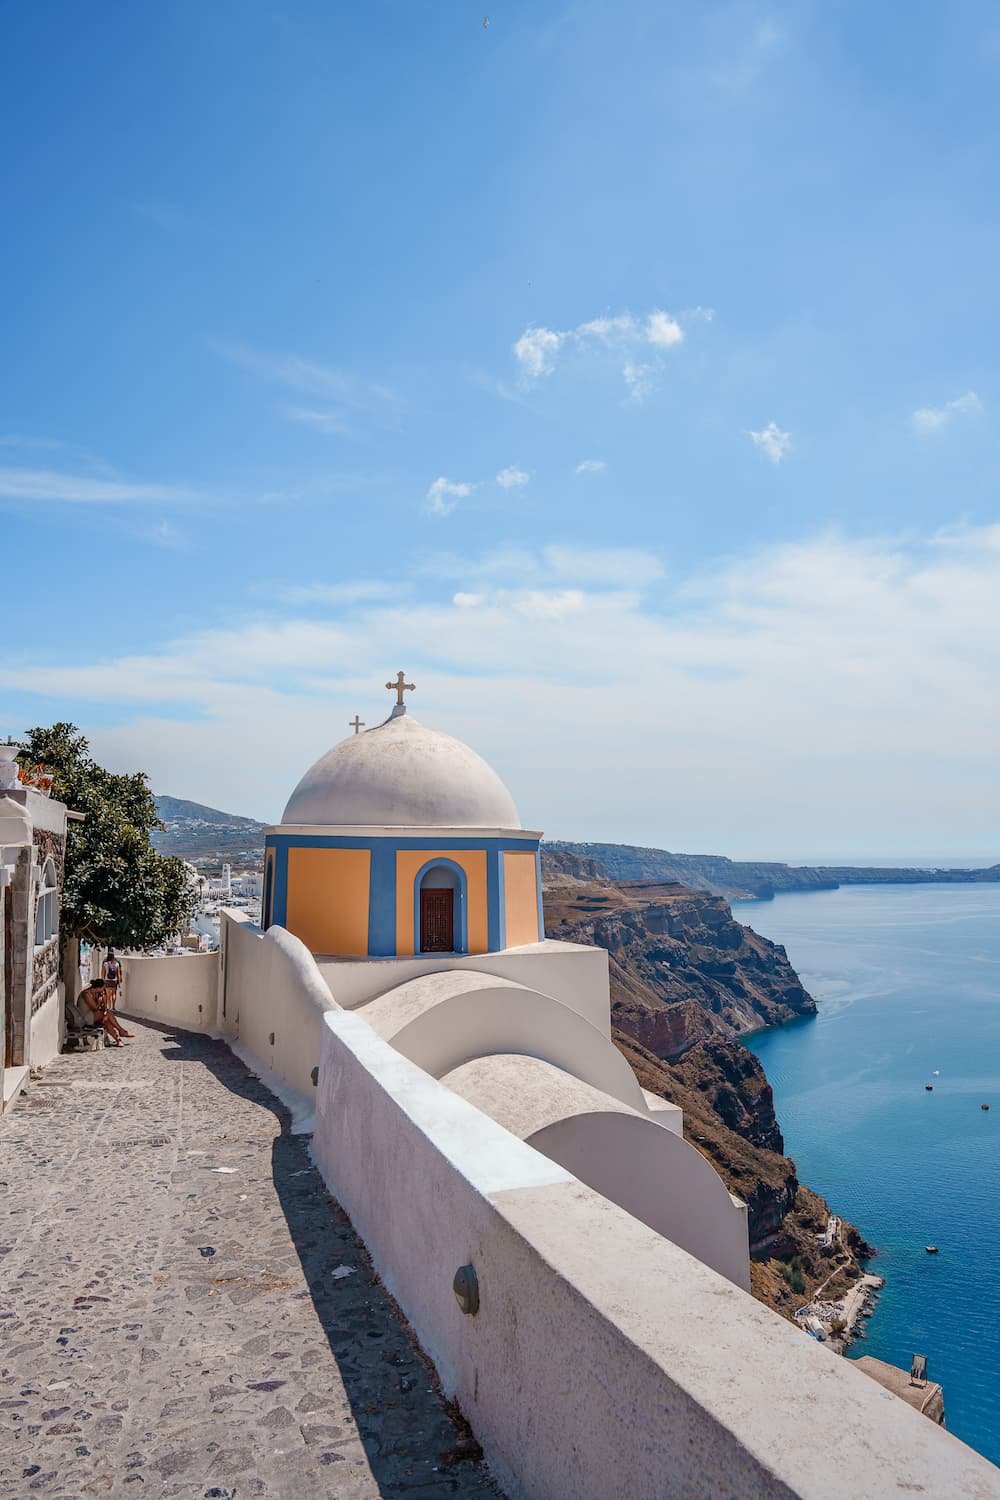 3-Day Santorini Itinerary: Explore the breathtaking beauty of a church on a hill overlooking the sea.